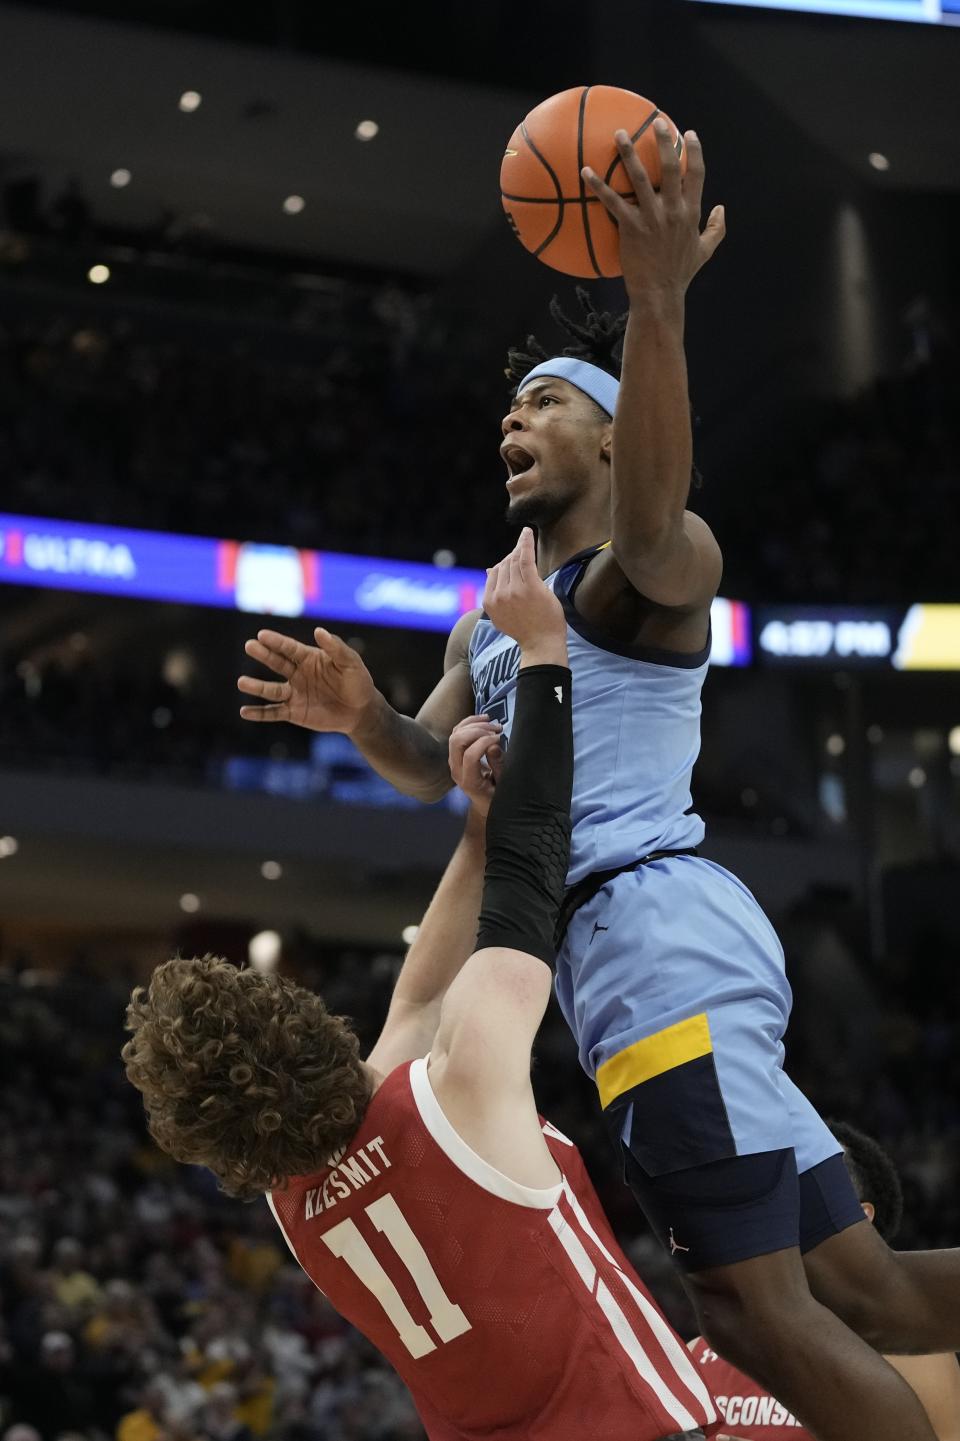 Marquette's Chase Ross is called for a charge on Wisconsin's Max Klesmit during the second half of an NCAA college basketball game Saturday, Dec. 3, 2022, in Milwaukee. Wisconsin won 80-77 in overtime. (AP Photo/Morry Gash)